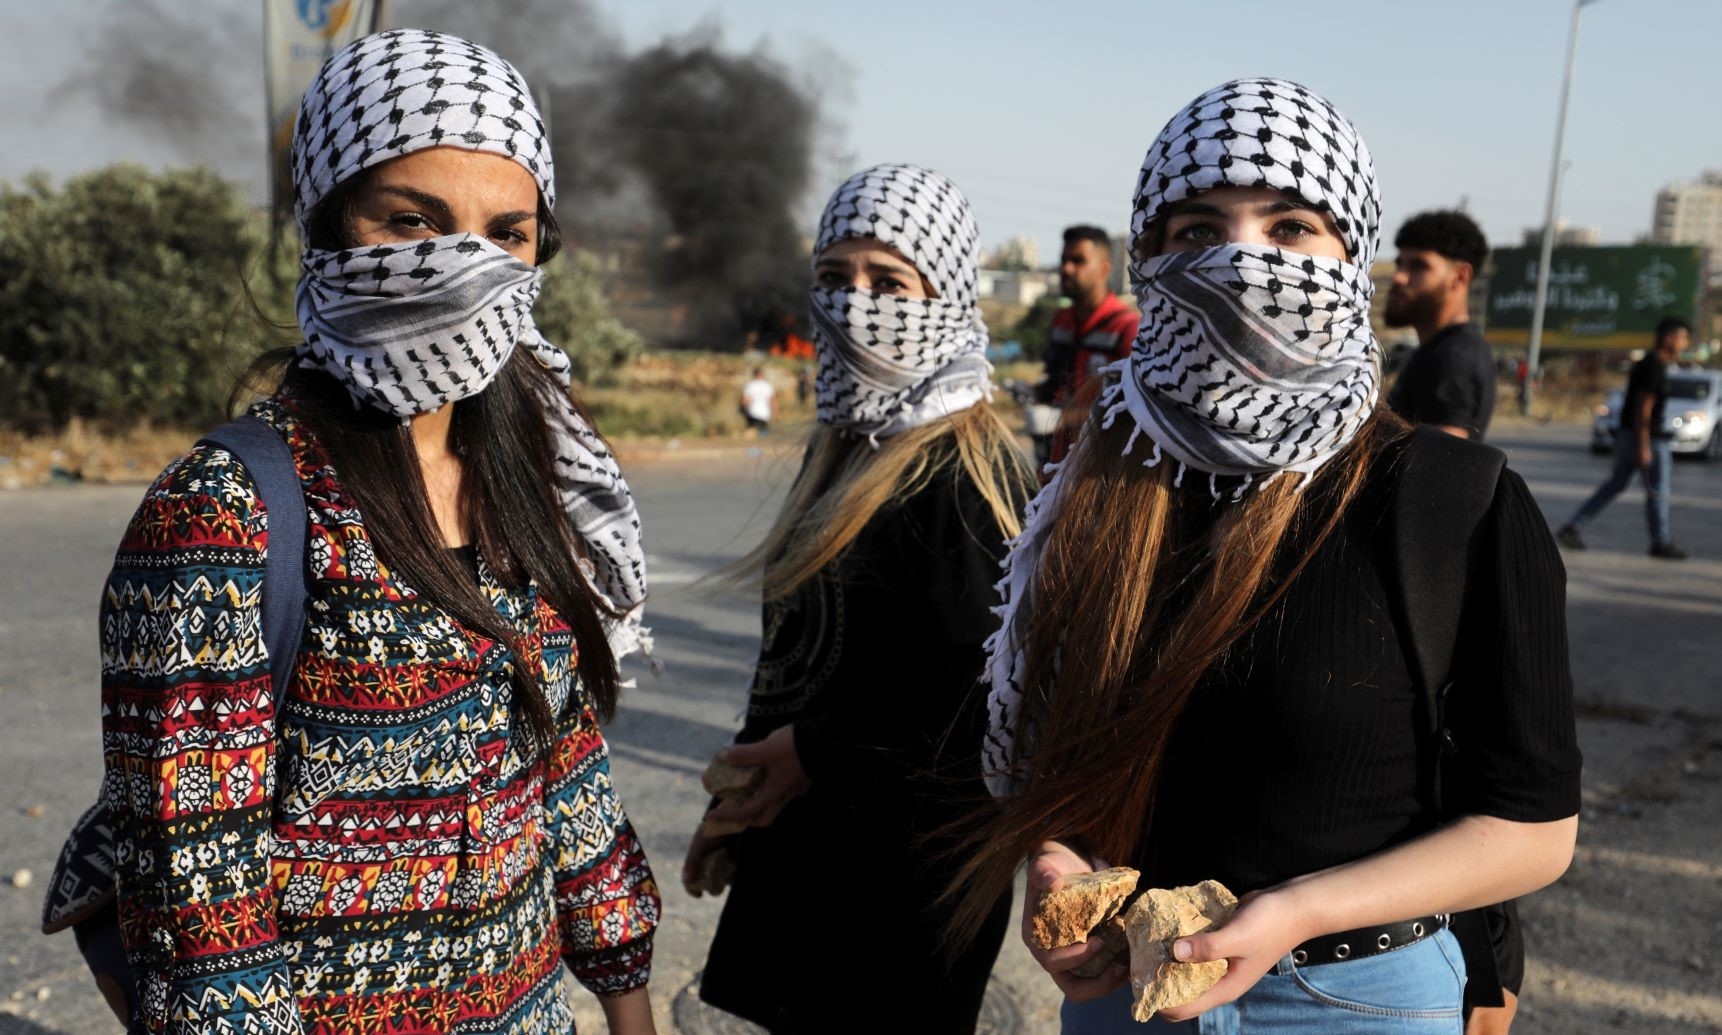 What's the symbolism of keffiyeh patterns?